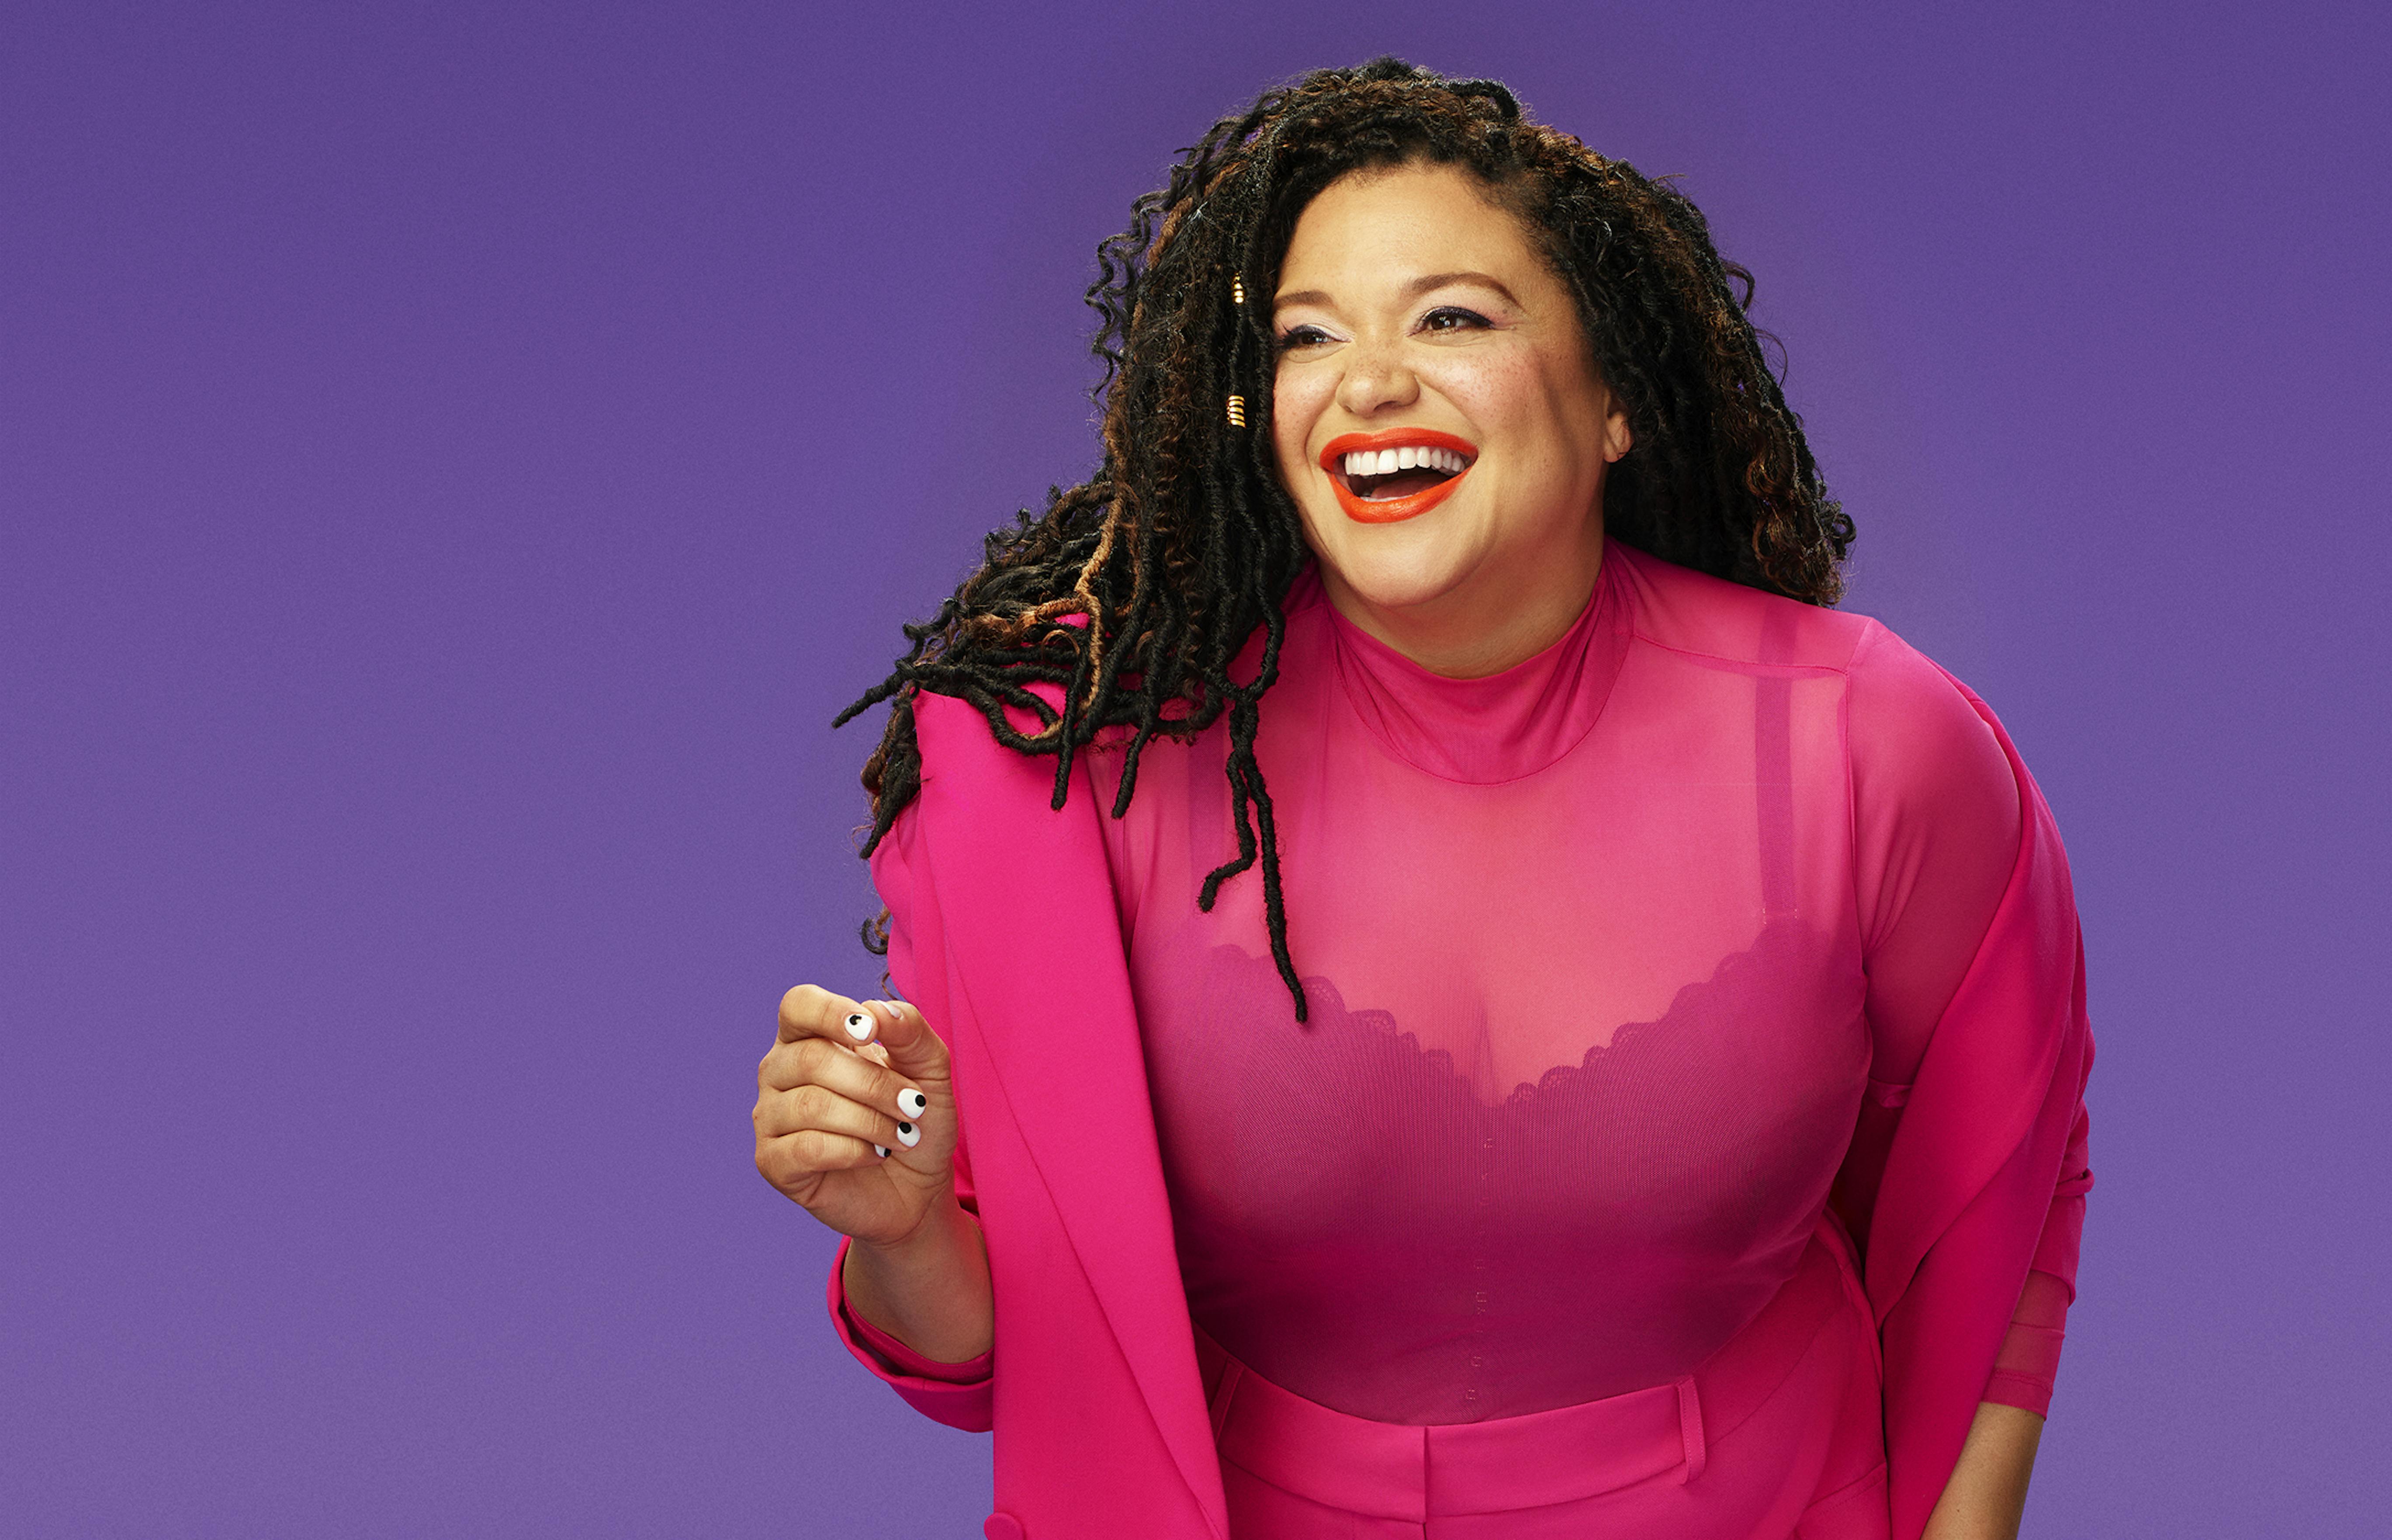 Michelle Buteau wears a pink top over a dark tank, against a purple background.